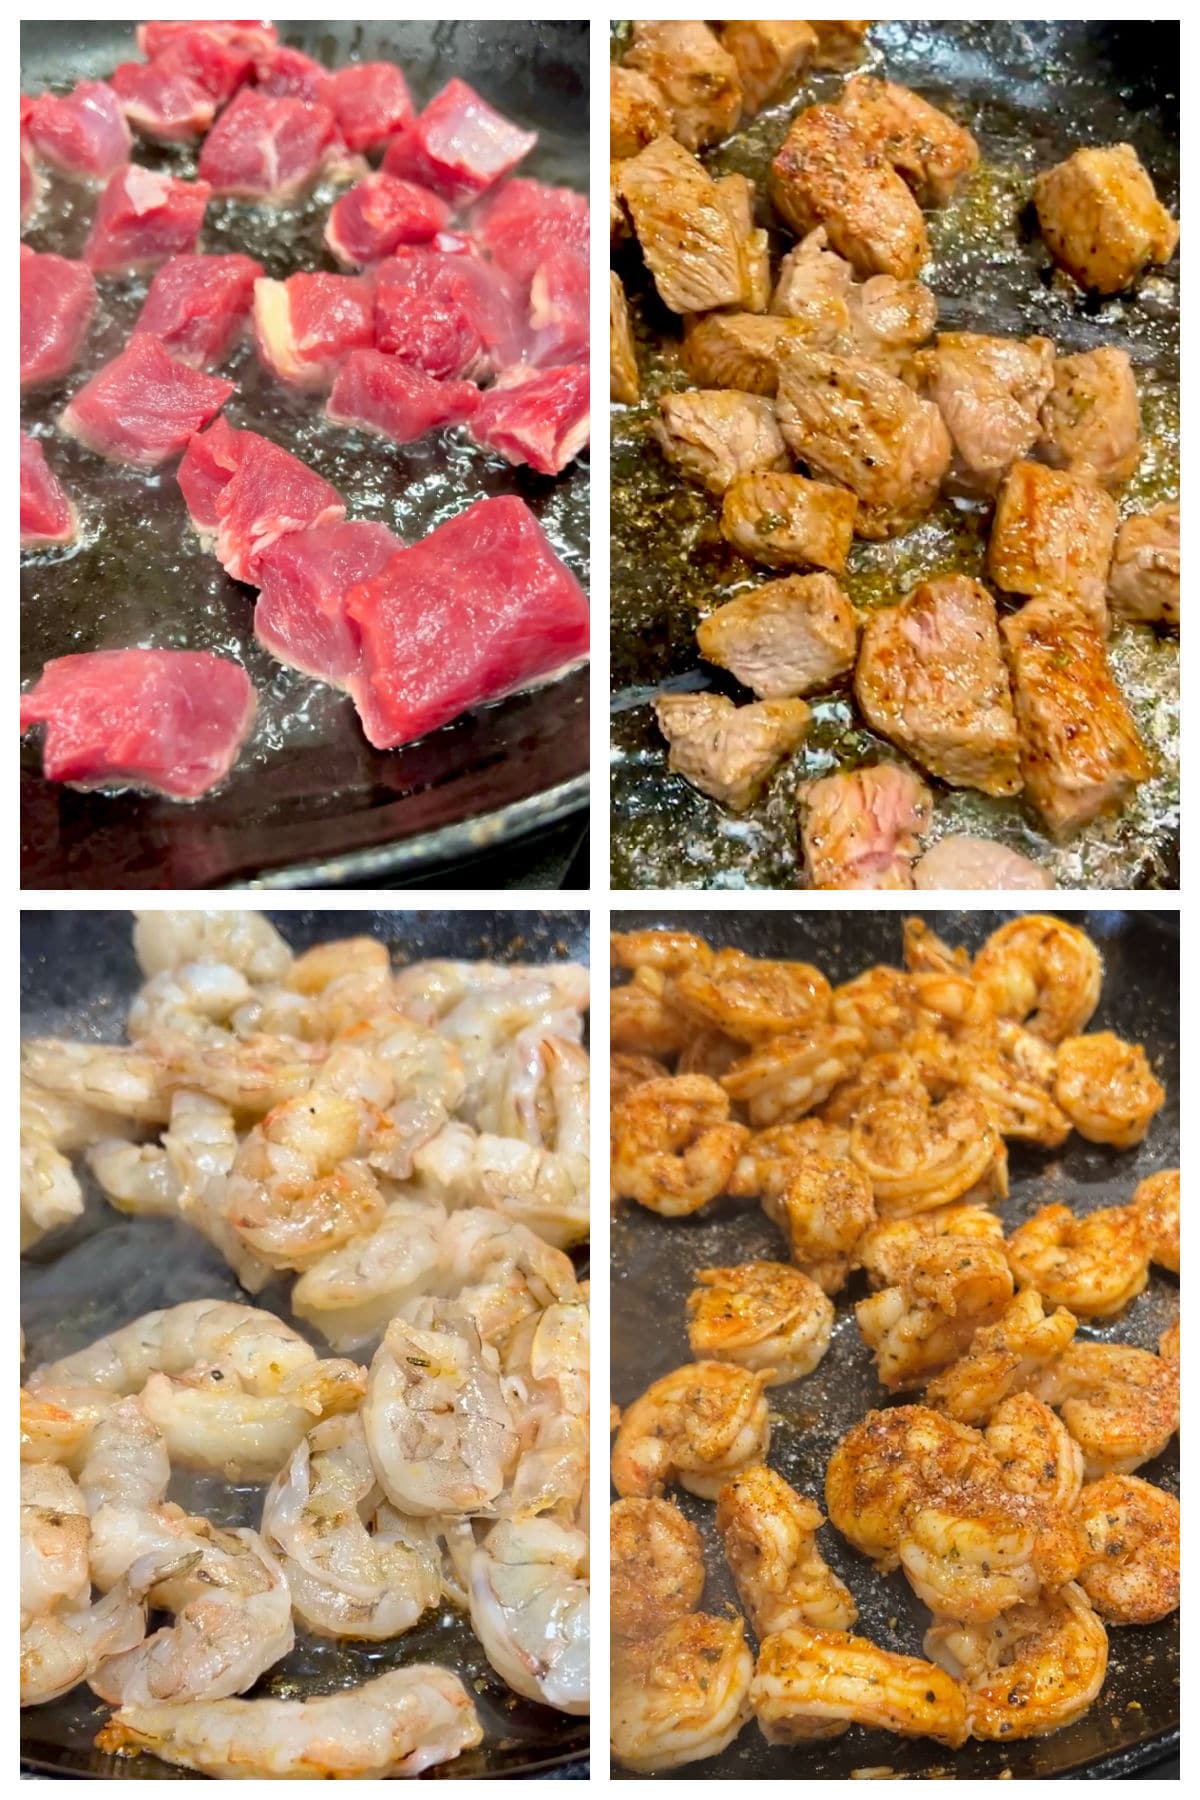 Cooking steak and shrimp with creole seasoning - collage.